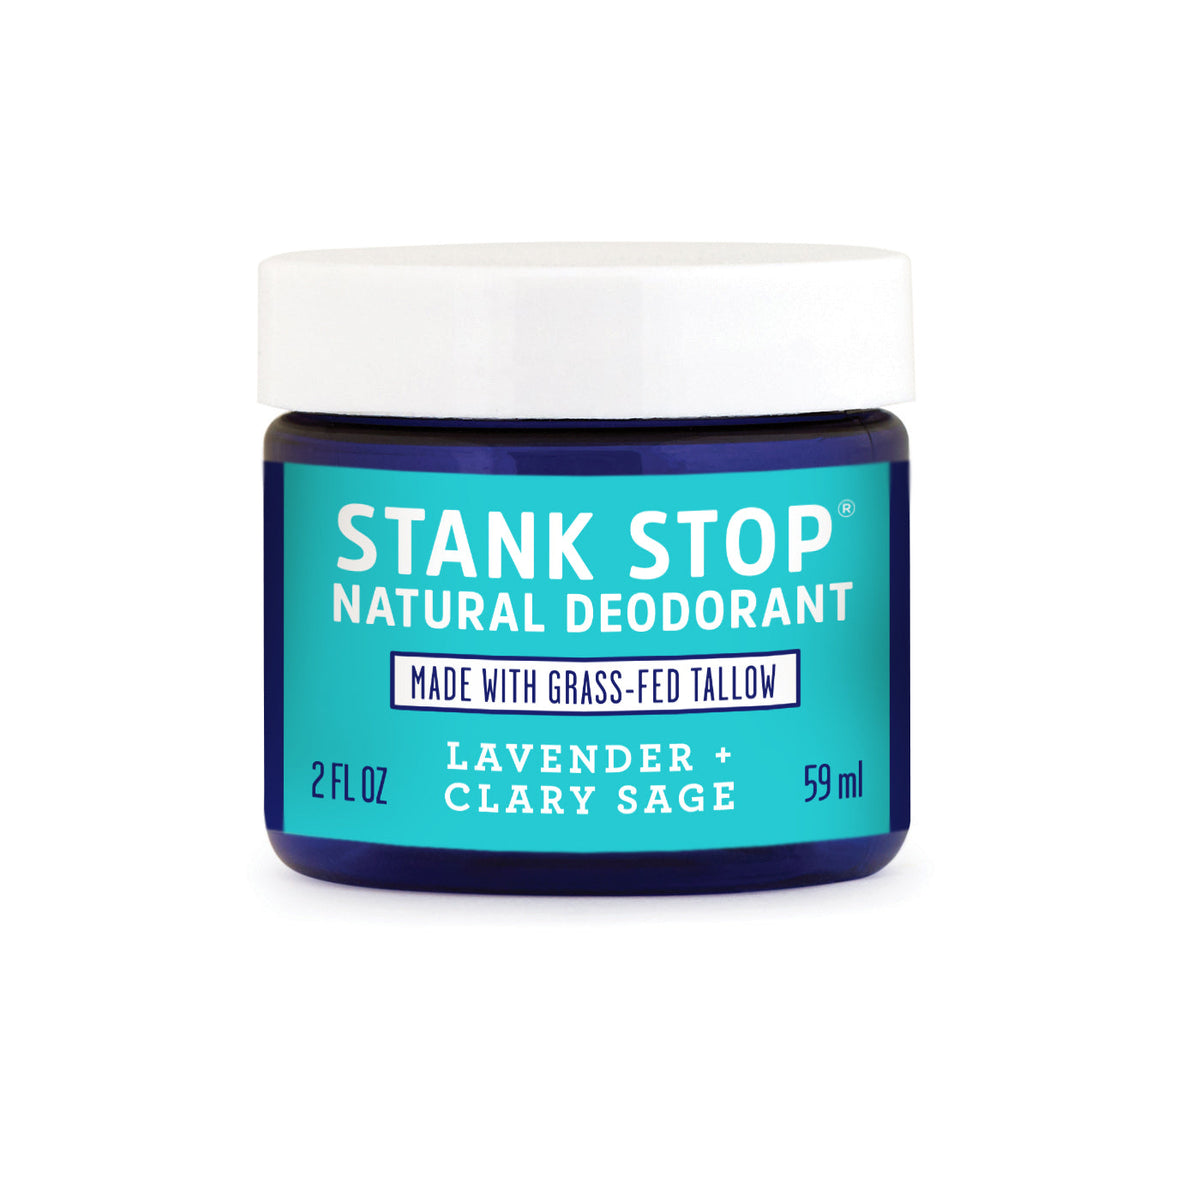 Stank Stop Cream Deodorant, Lavender+Sage, 2 Oz by FATCO Skincare Products